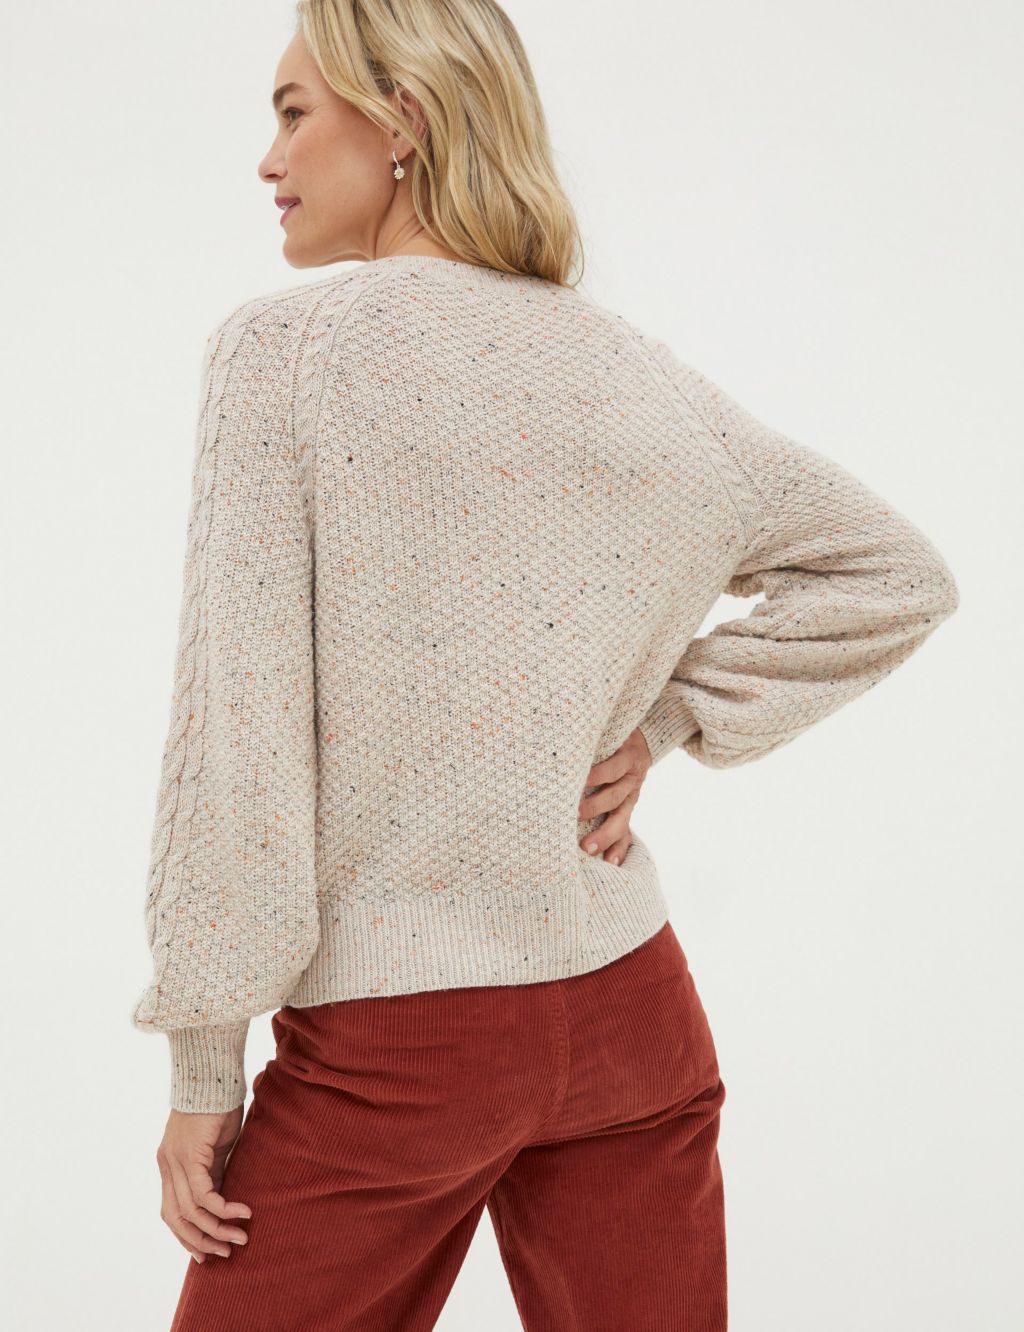 Cable Knit Crew Neck Cardigan with Wool image 3